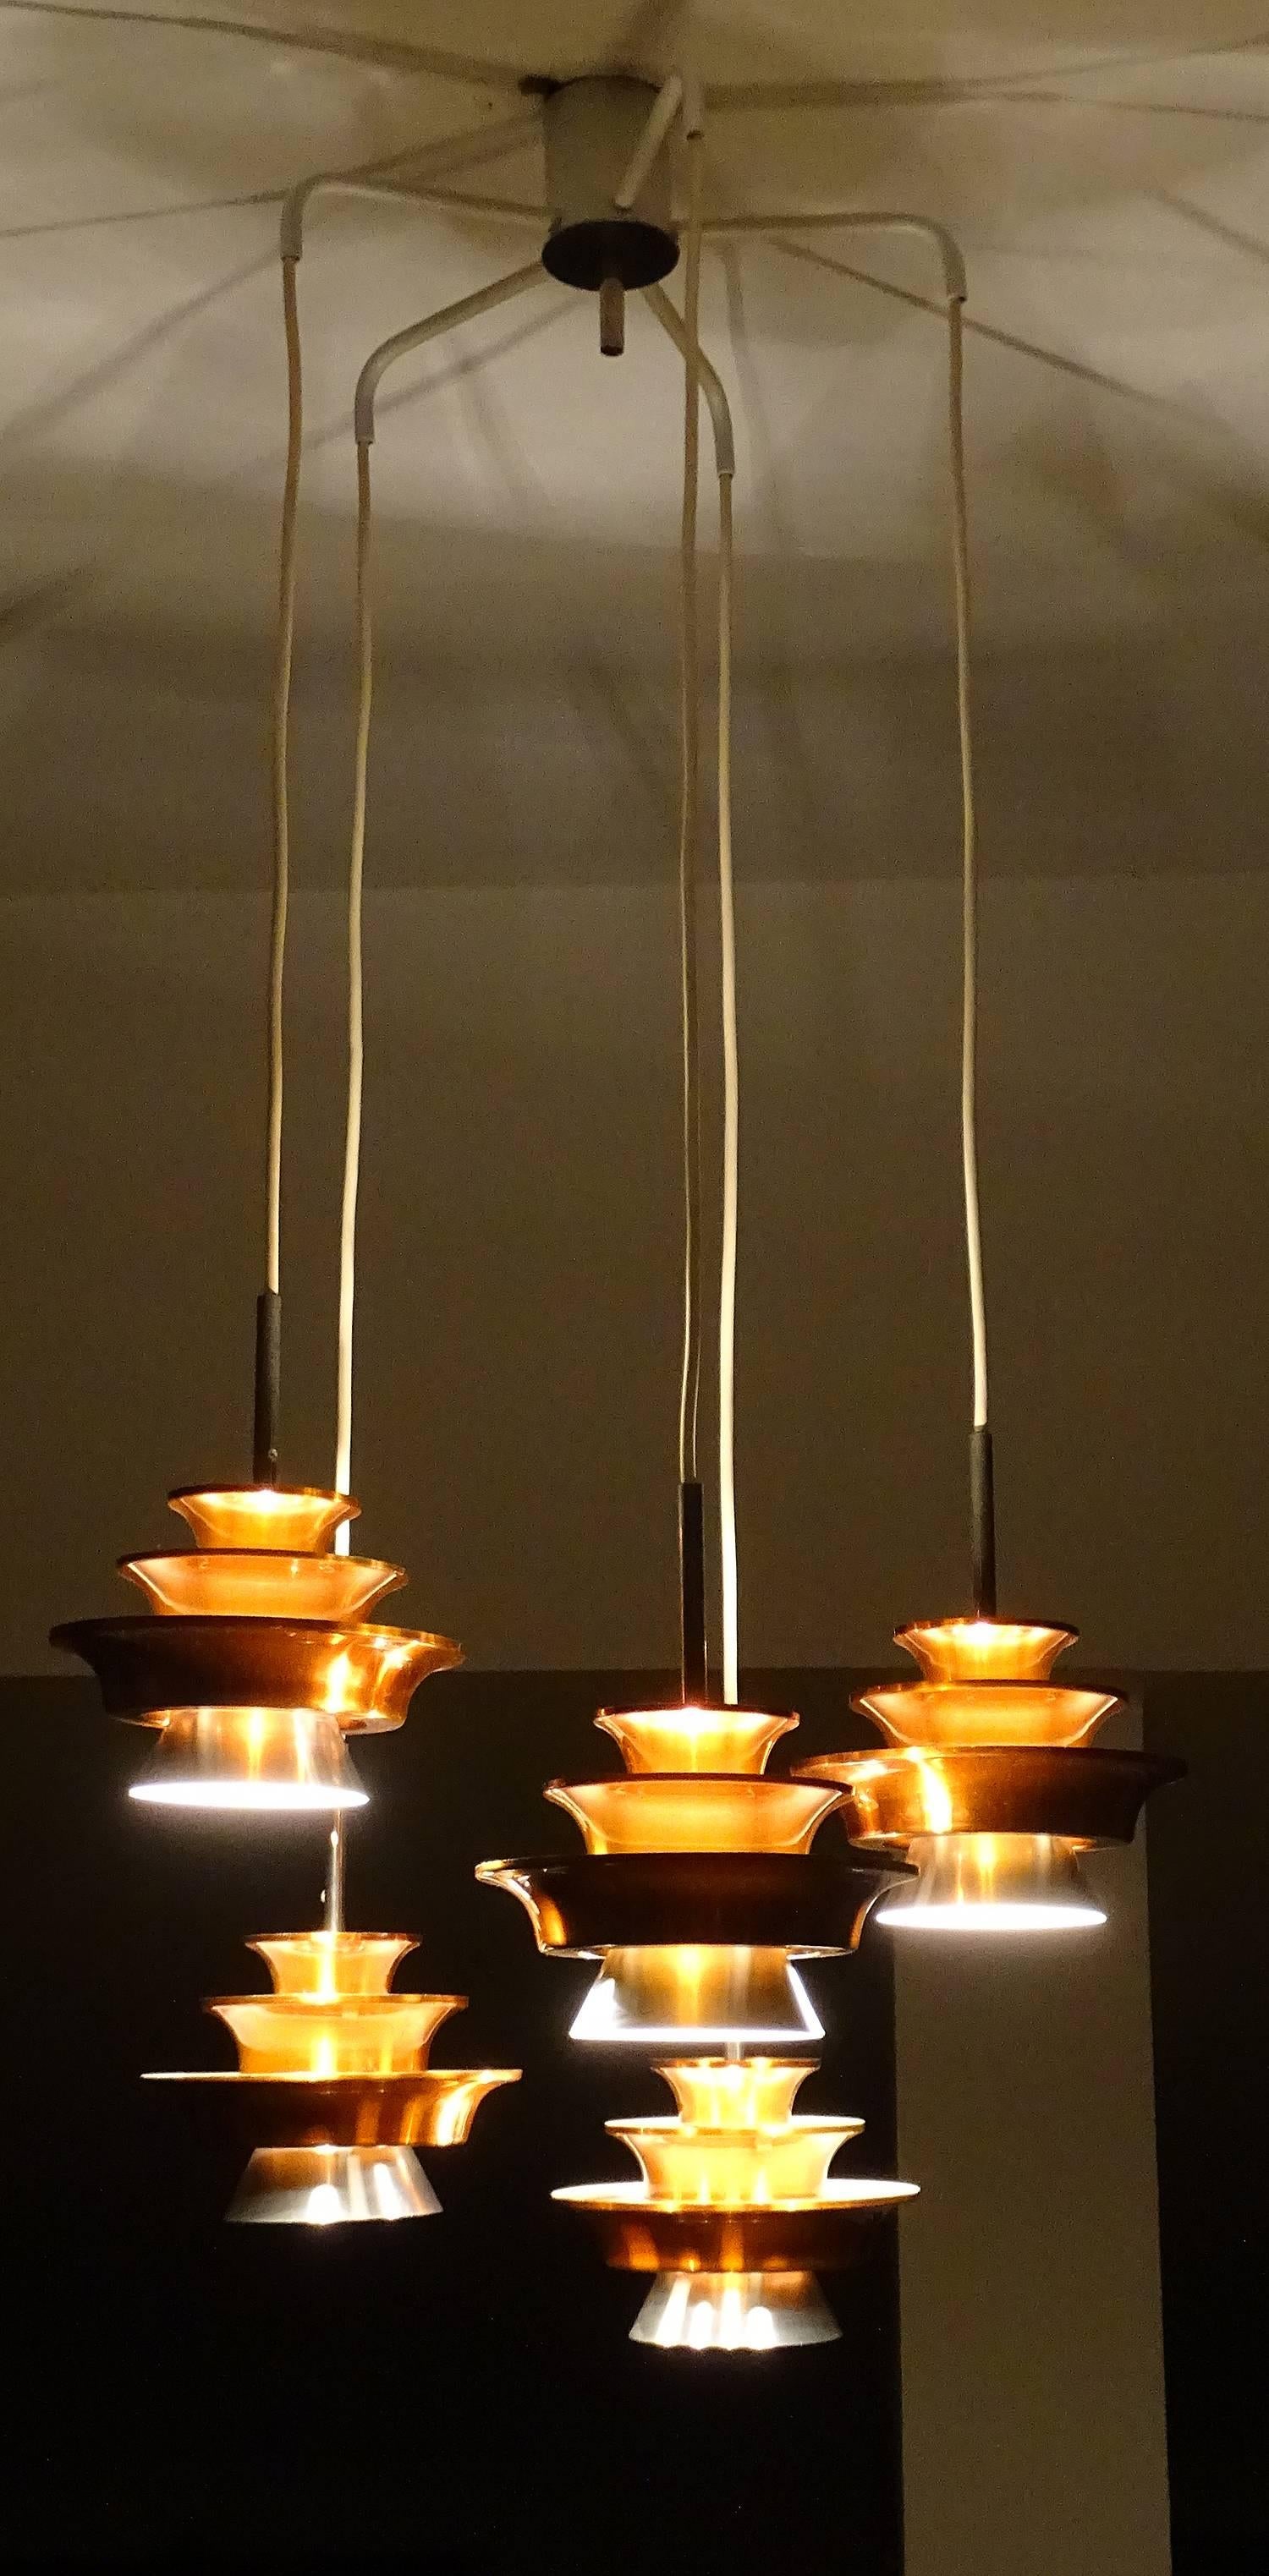 All our lights electricals are checked and tested with 110 and 220 Volts bulbs

Five-Tiered Danish Lyfa  Chandelier pendant light.Each light made out of 4  stacked aluminium shades, the three uppermost with a copper colour.  

Dimensions
41.34 in.H